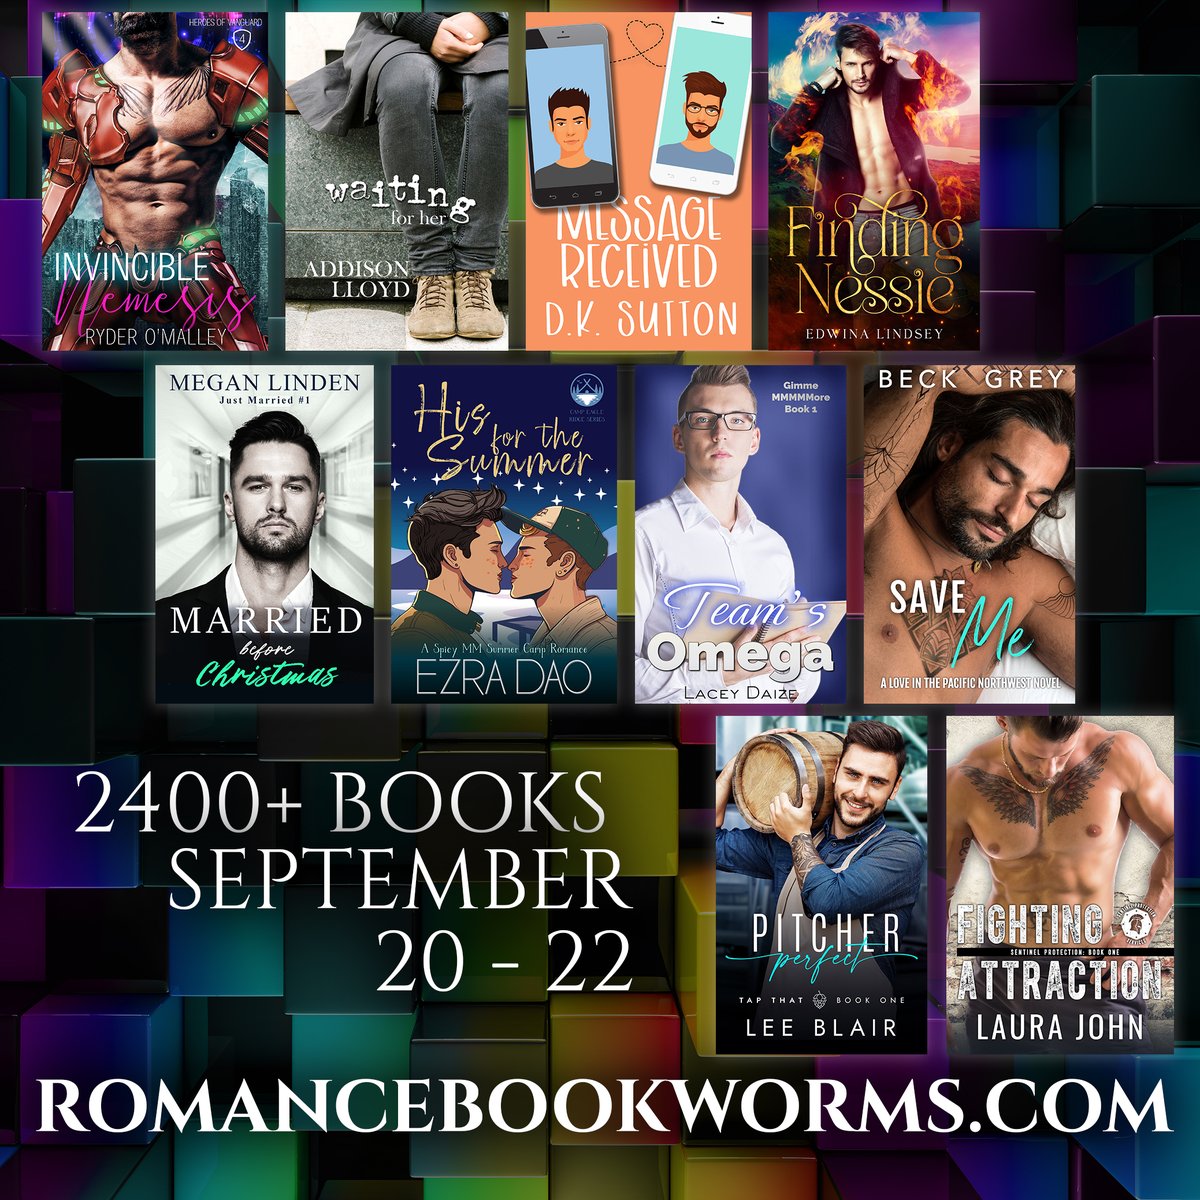 It's Stuff Your E-Reader Day! GIant selection, with over 280 LGBTQ books, and 2400+ romance books in general. It runs Sept 20-22. Start shopping now at bit.ly/3LuFhSA

#stuffyourkindleday #StuffYoureReader #mmromance #gayromance #romancebooks